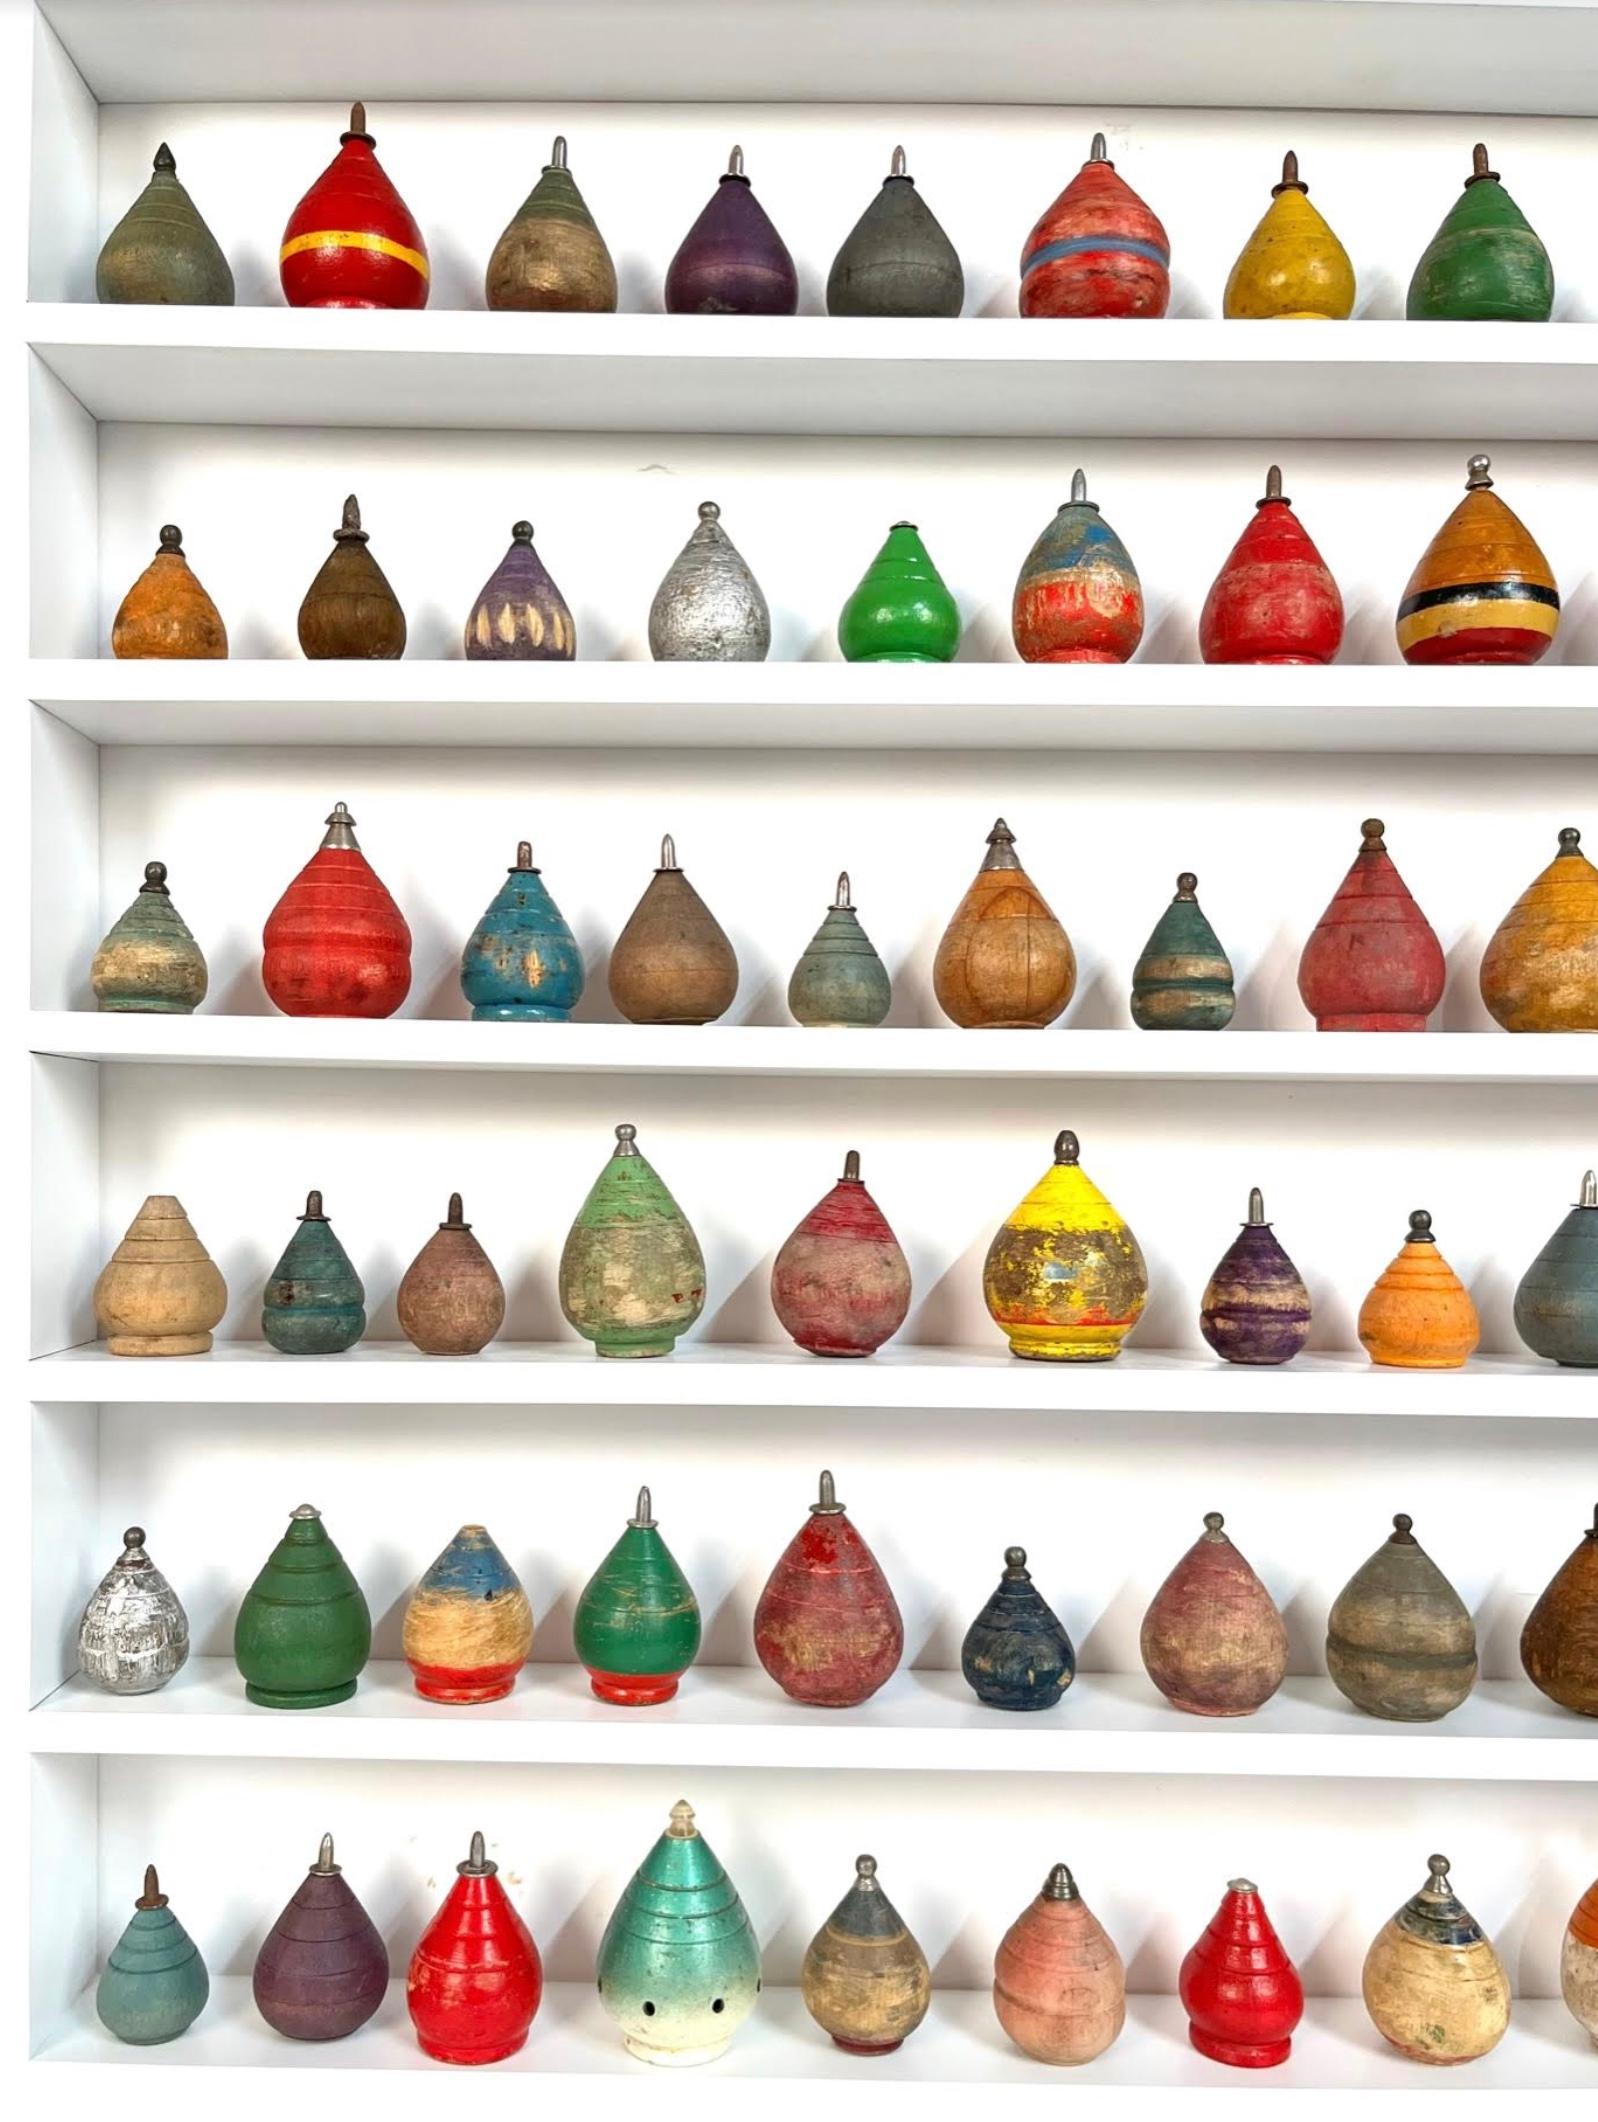 Large colorful collection of 104 antique spinning tops of various shapes and colors dating from 1880-1960. The tops are displayed in a custom-made cabinet grade white painted maple shadow box. The display case measures 32